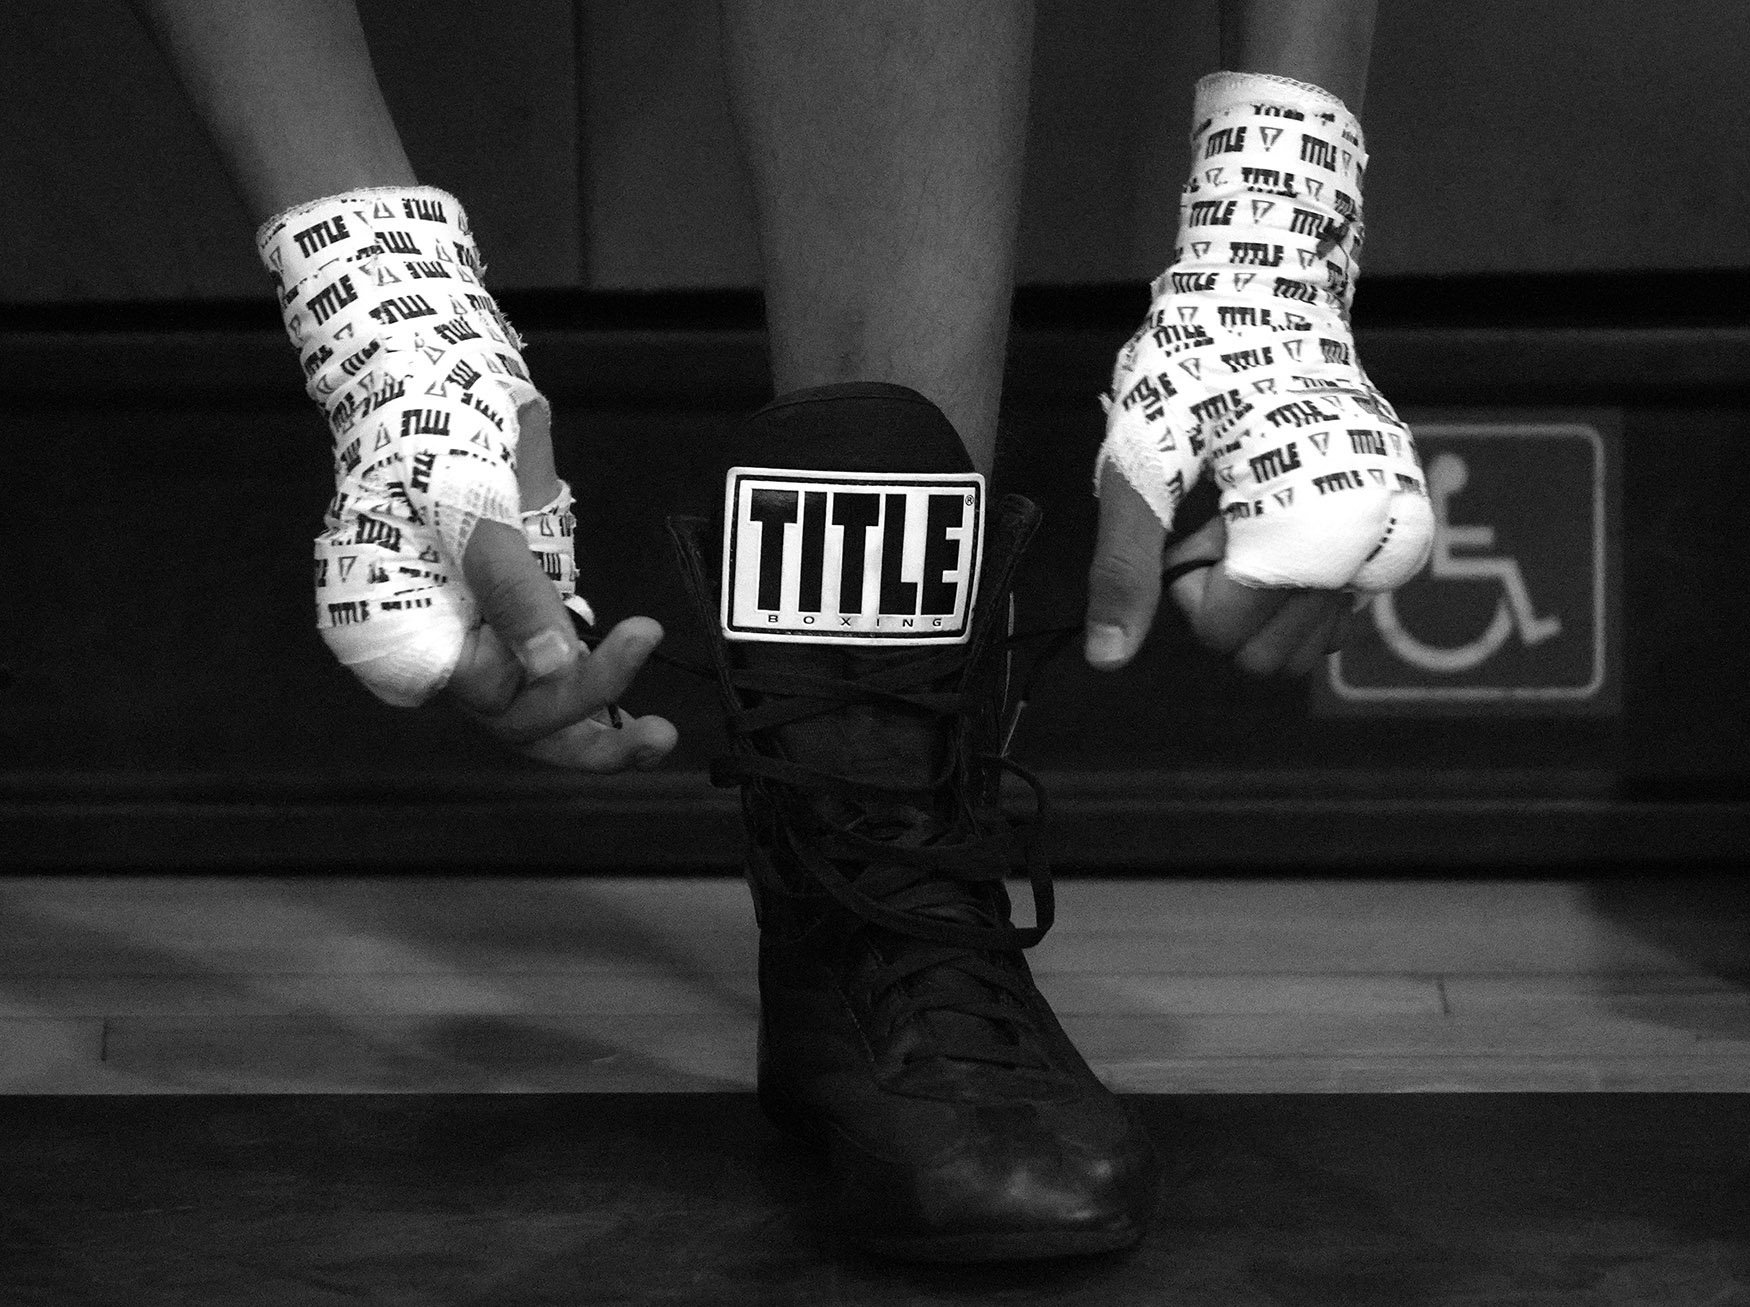  Miguel Rosales Jr ties his shoes prior to his bout during the annual amateur boxing show staged by the Duarte Boxing Club at Duarte High School in Duarte on Saturday, August 13, 2022.  